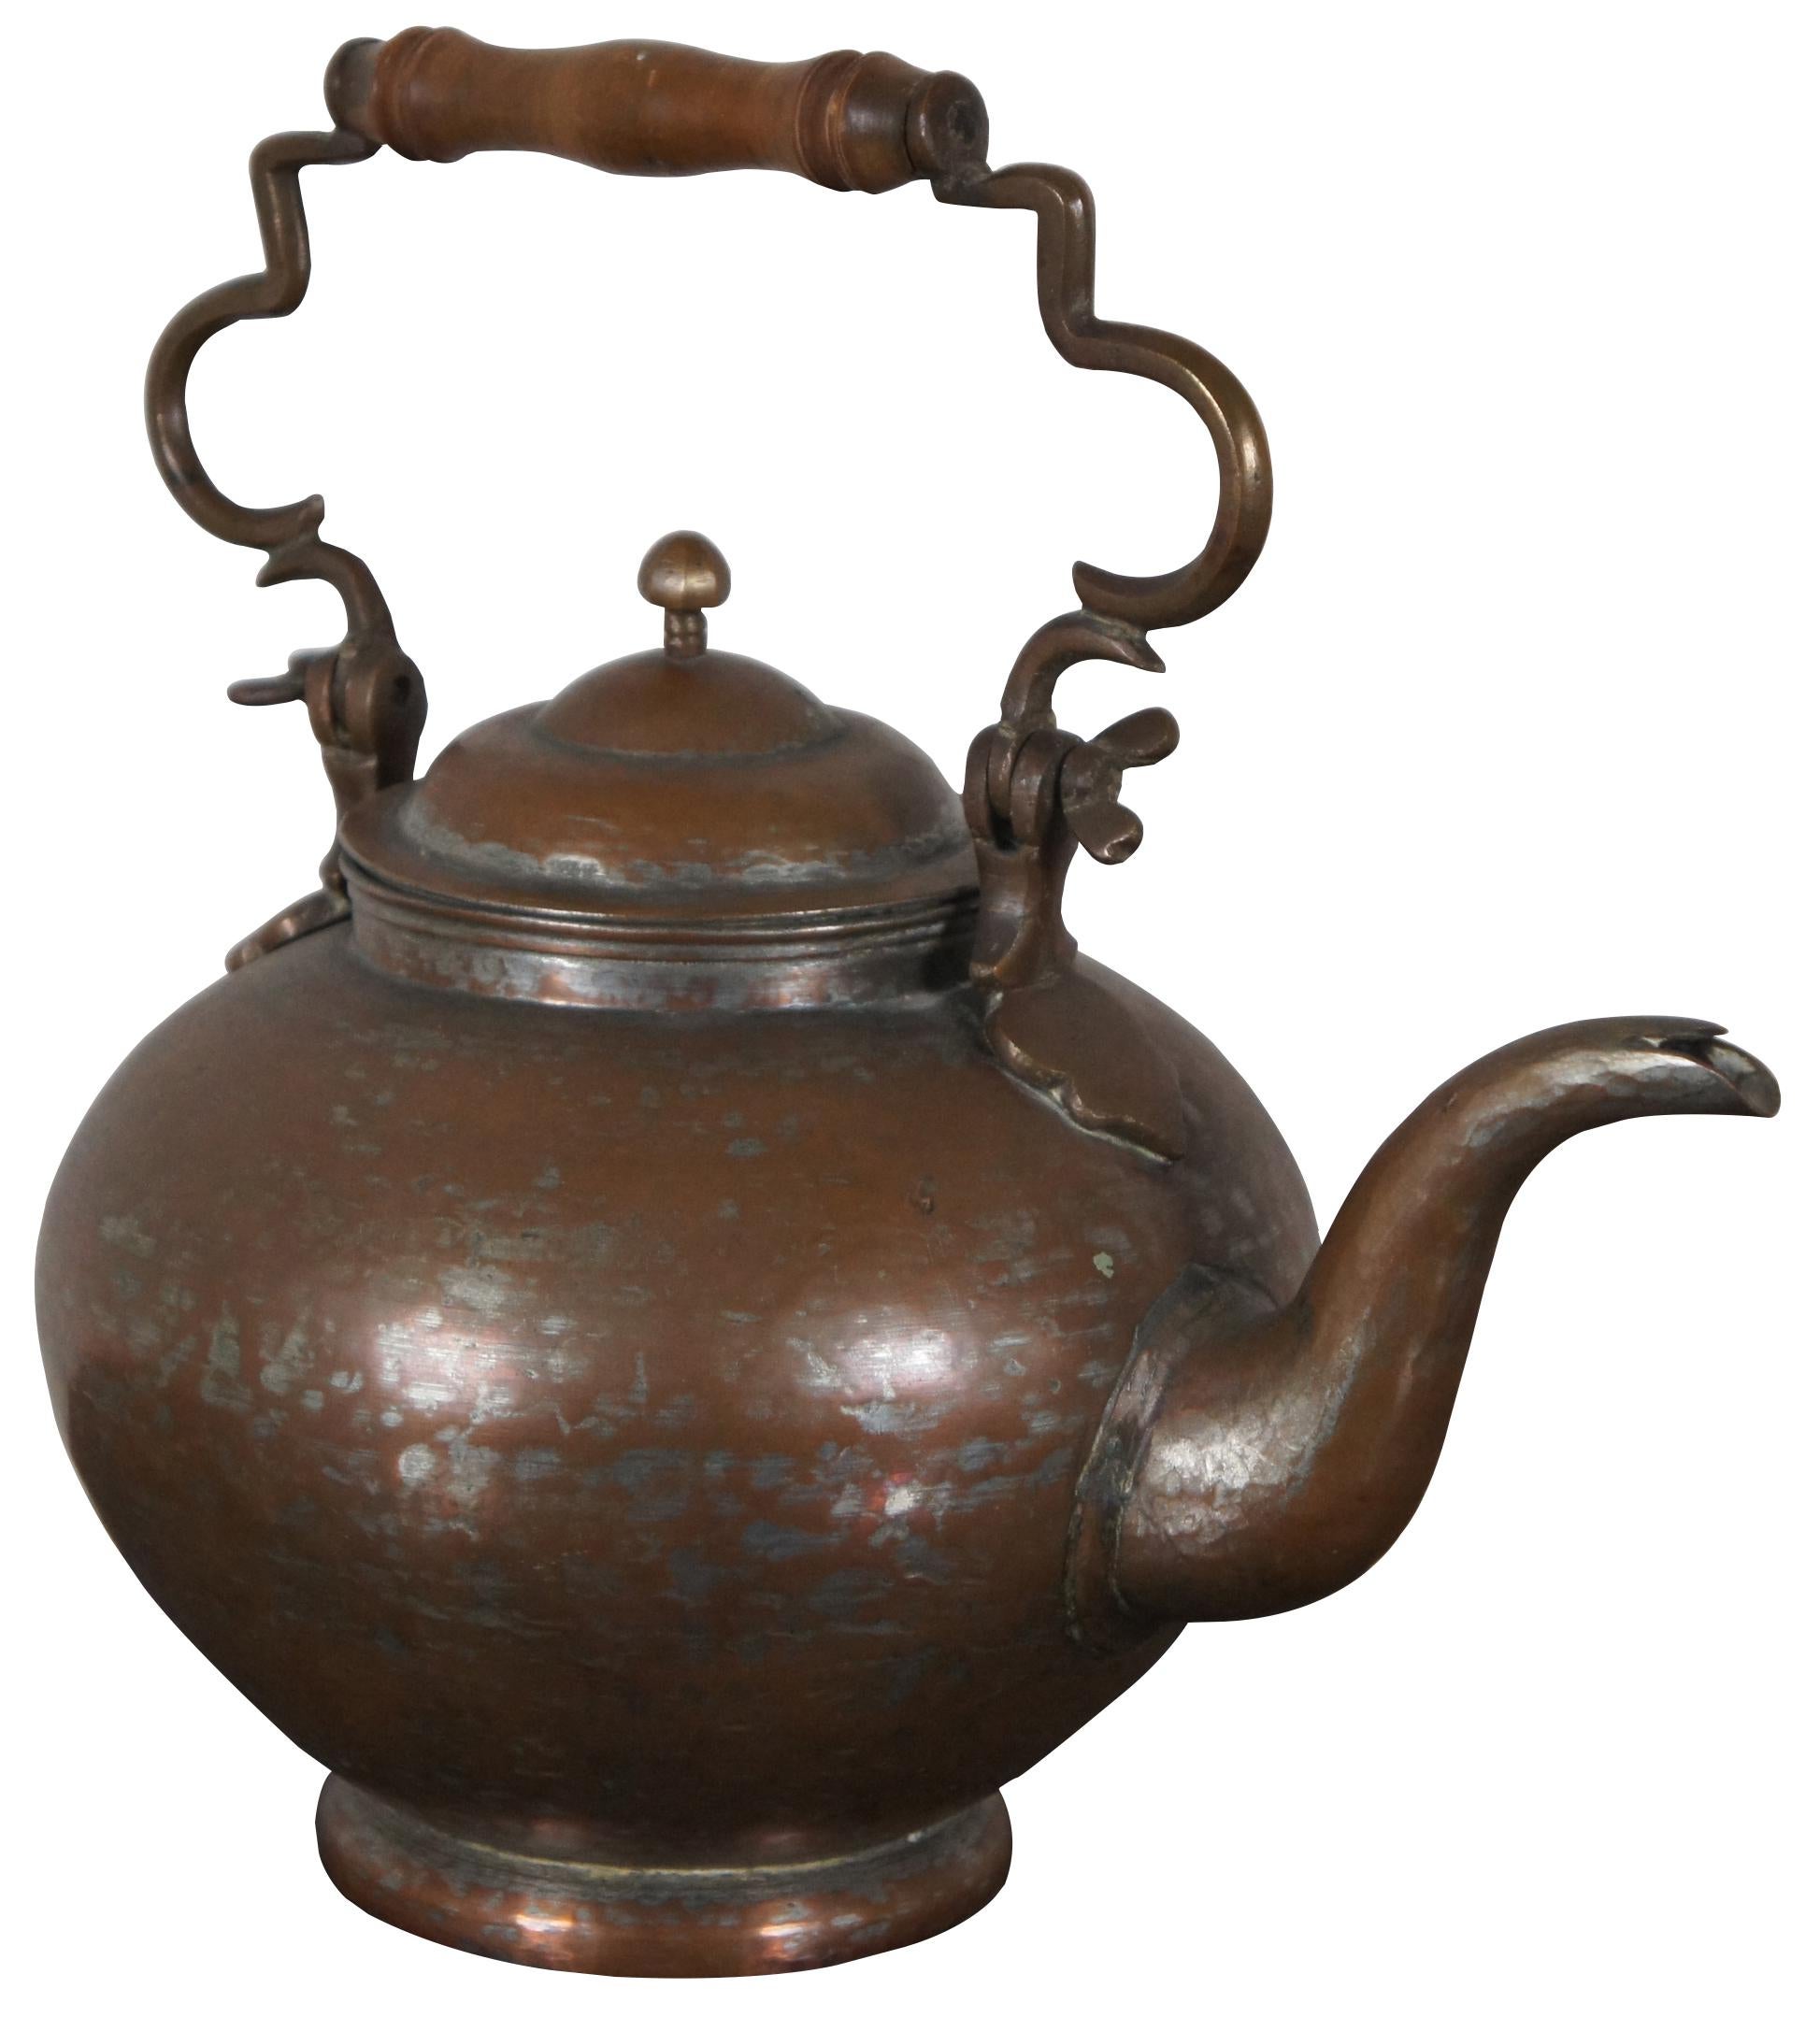 Antique copper clad gooseneck tea kettle with lid and turned wood handle.

Measures: 13” x 9” x 9.5” / Height of Handle – 4.75” (Width x Depth x Height).